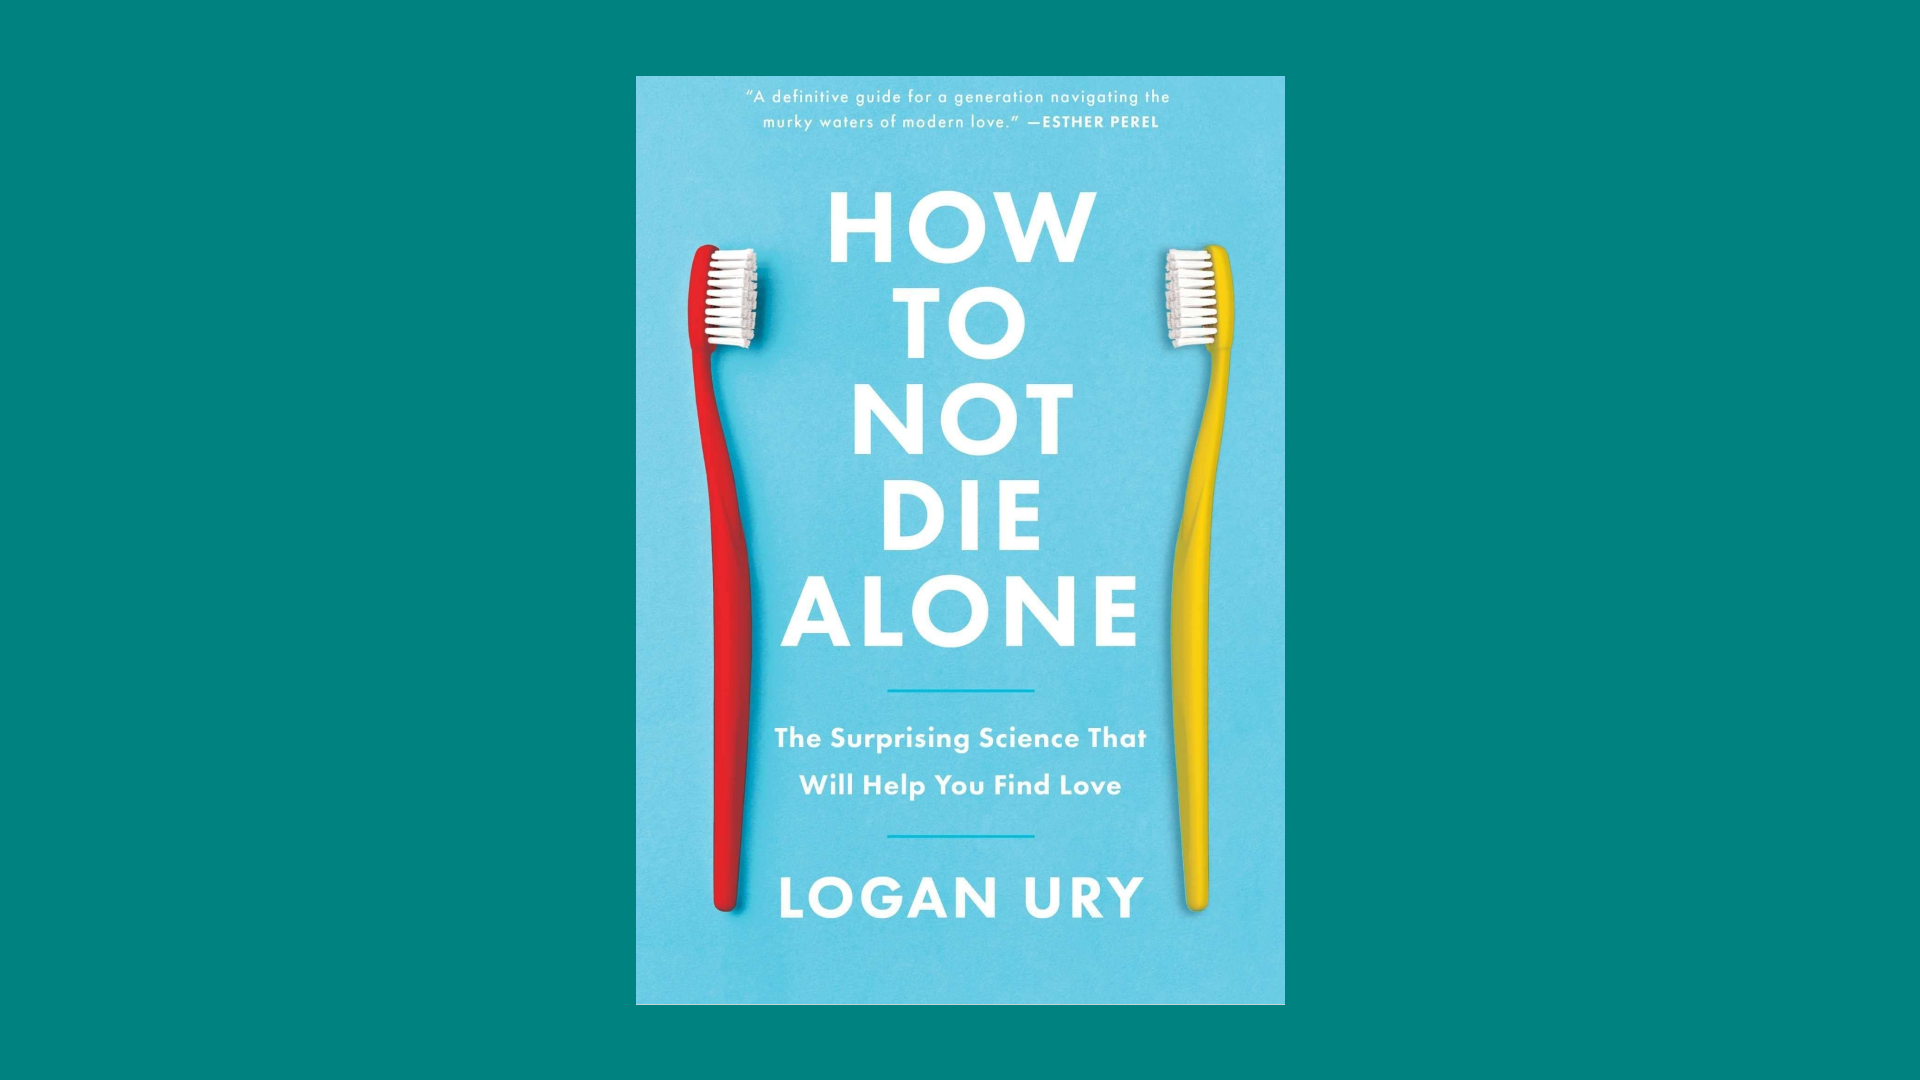 “How To Not Die Alone: The Surprising Science That Will Help You Find Love” by Logan Ury